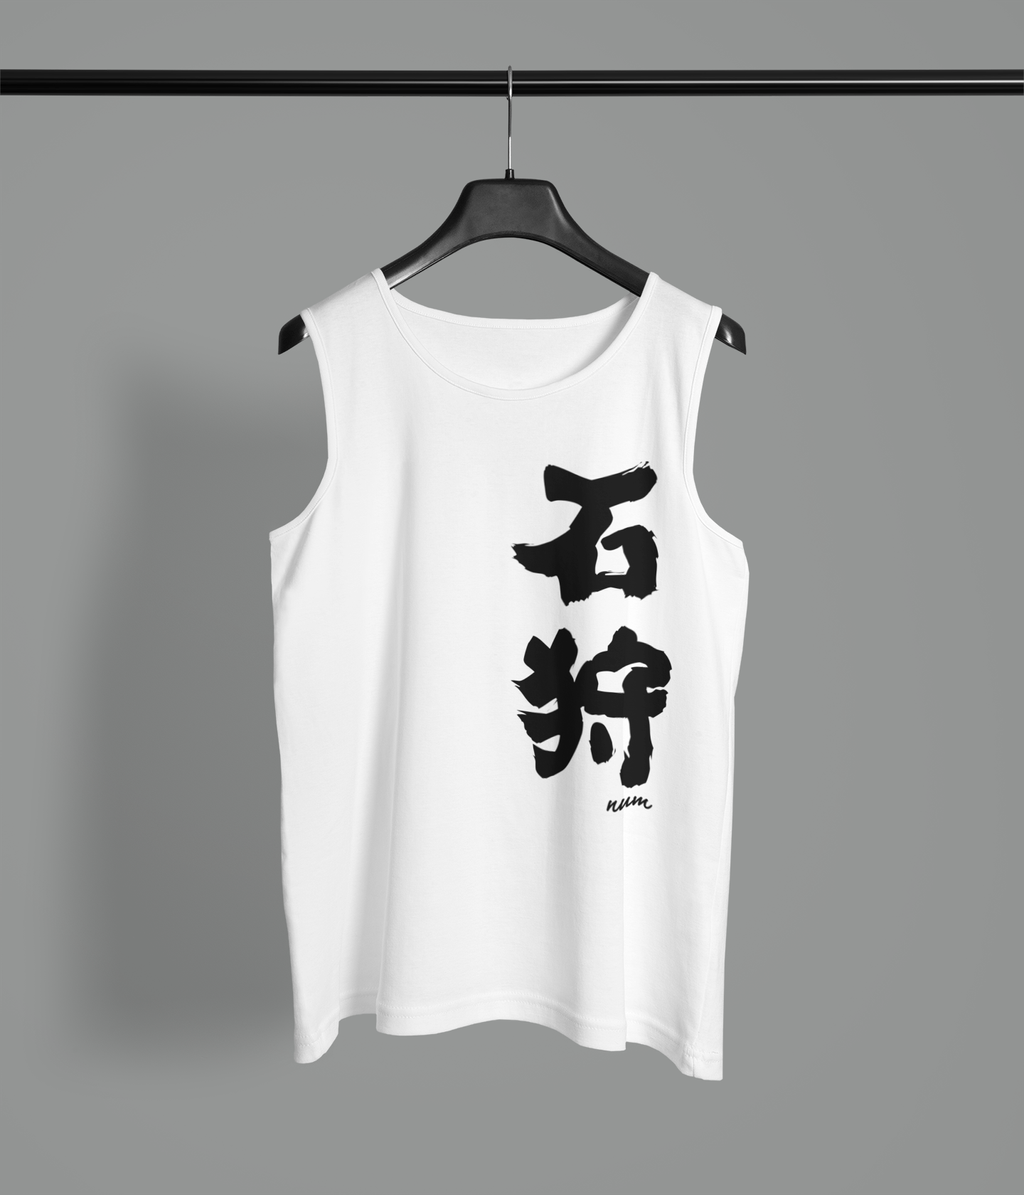 mockup-featuring-a-men-s-tank-top-hanging-from-a-dark-metal-pipe-1986-el1 (2).png